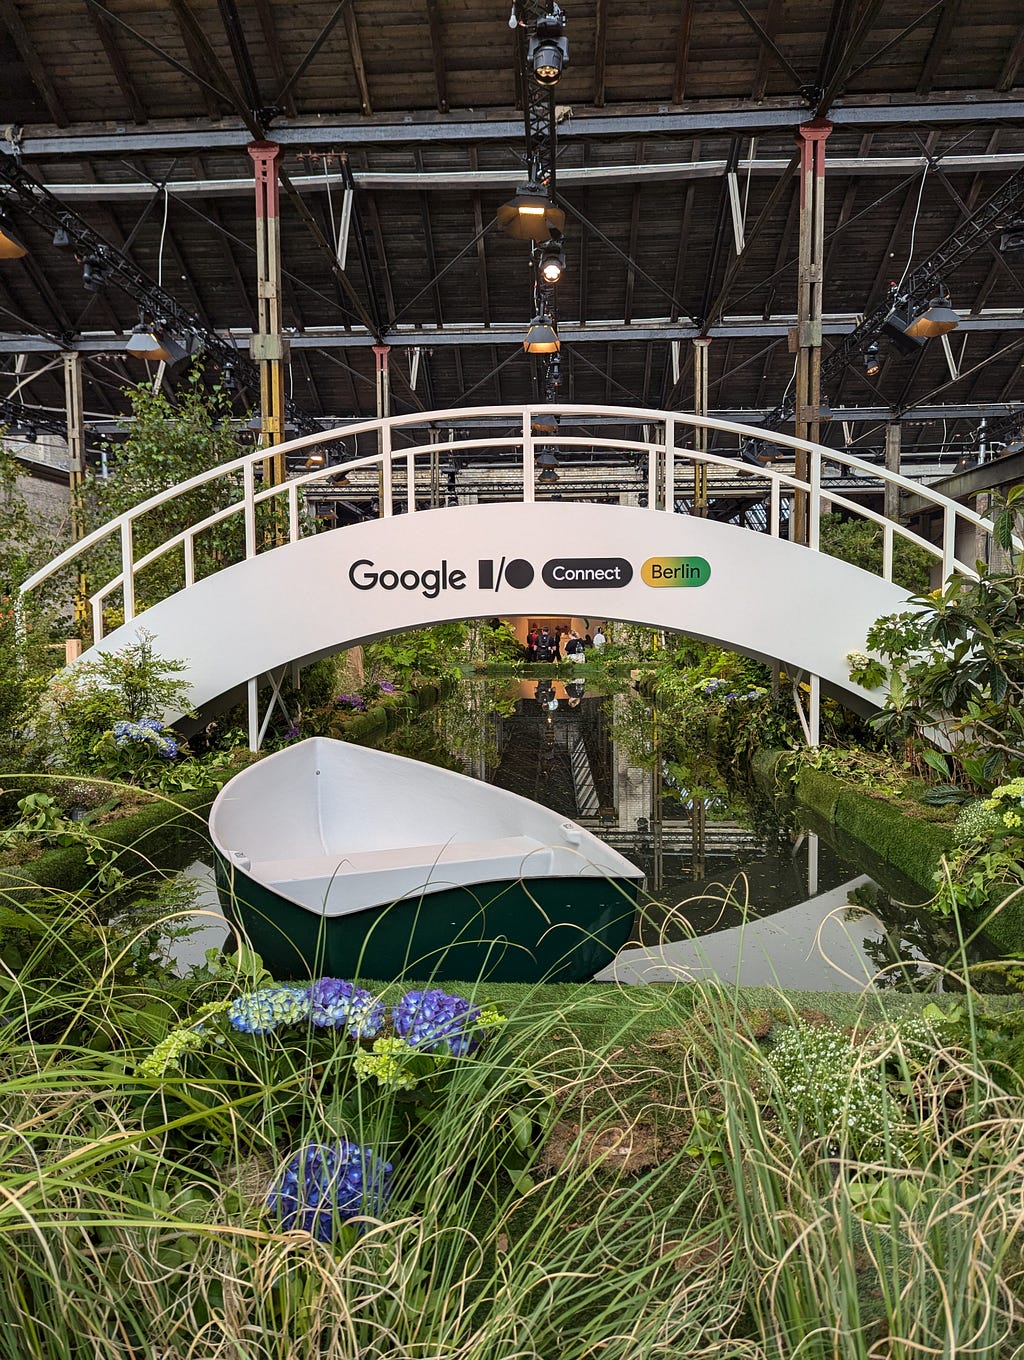 An artificial indoors river with a boat in the foreground and lush green riverbanks and a white bridge with the Google I/O Connect logo on spanning it